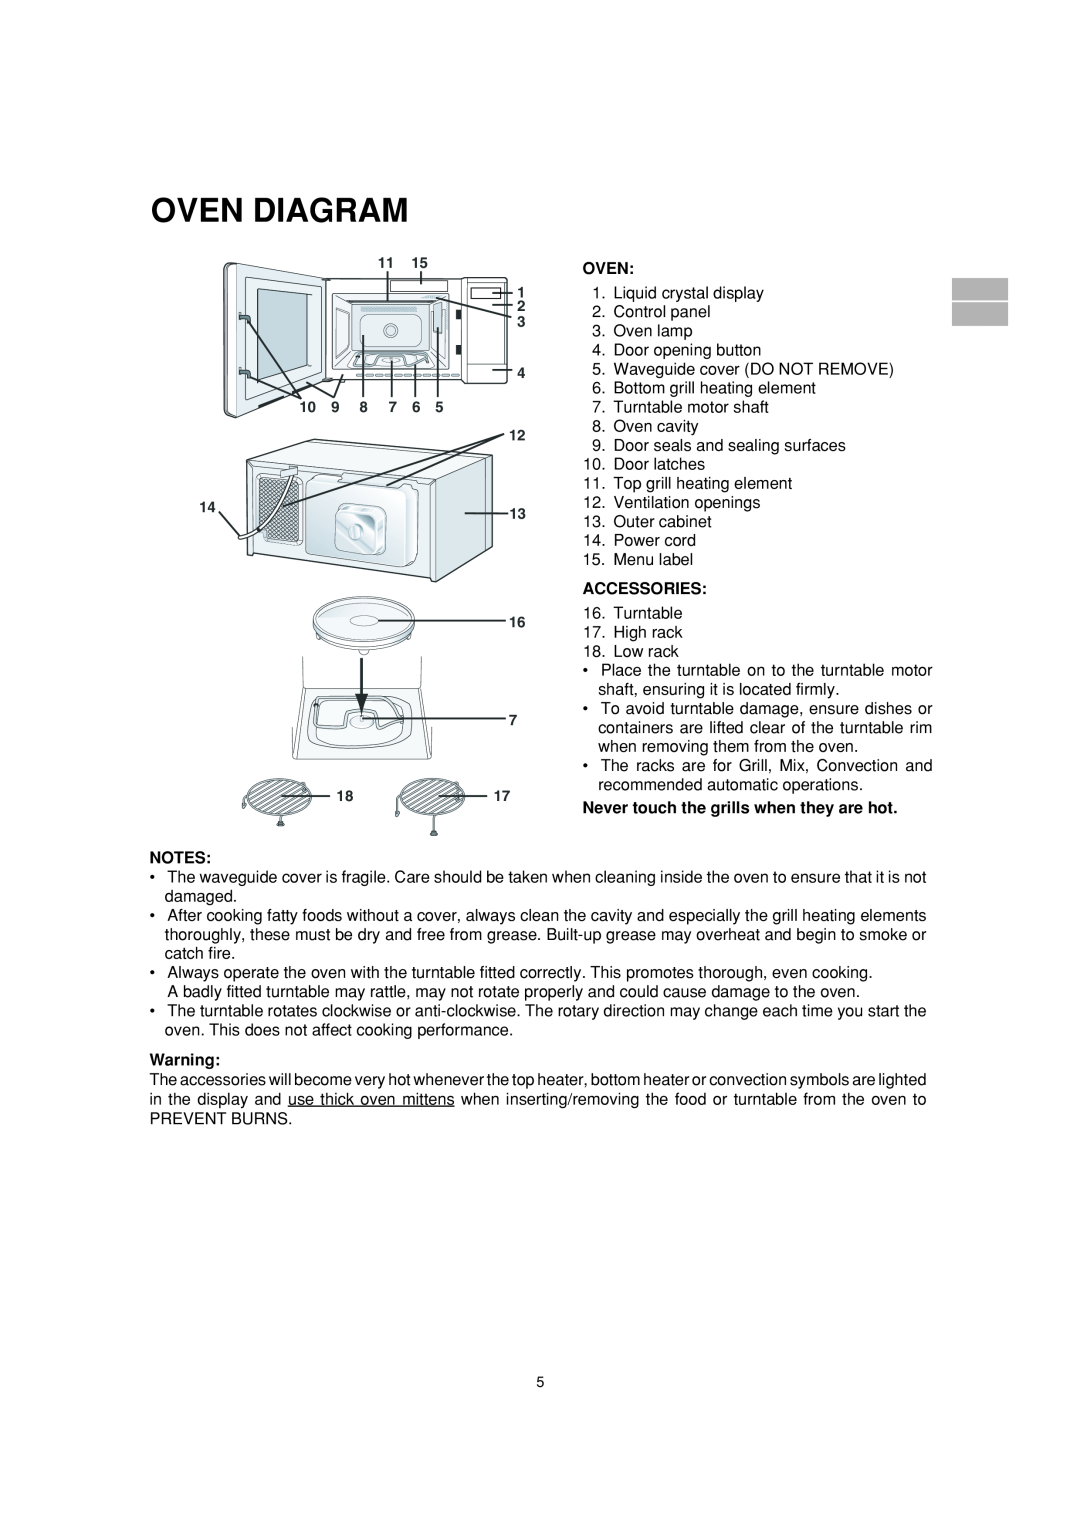 Sharp R-890N operation manual Oven Diagram, Accessories, Never touch the grills when they are hot 